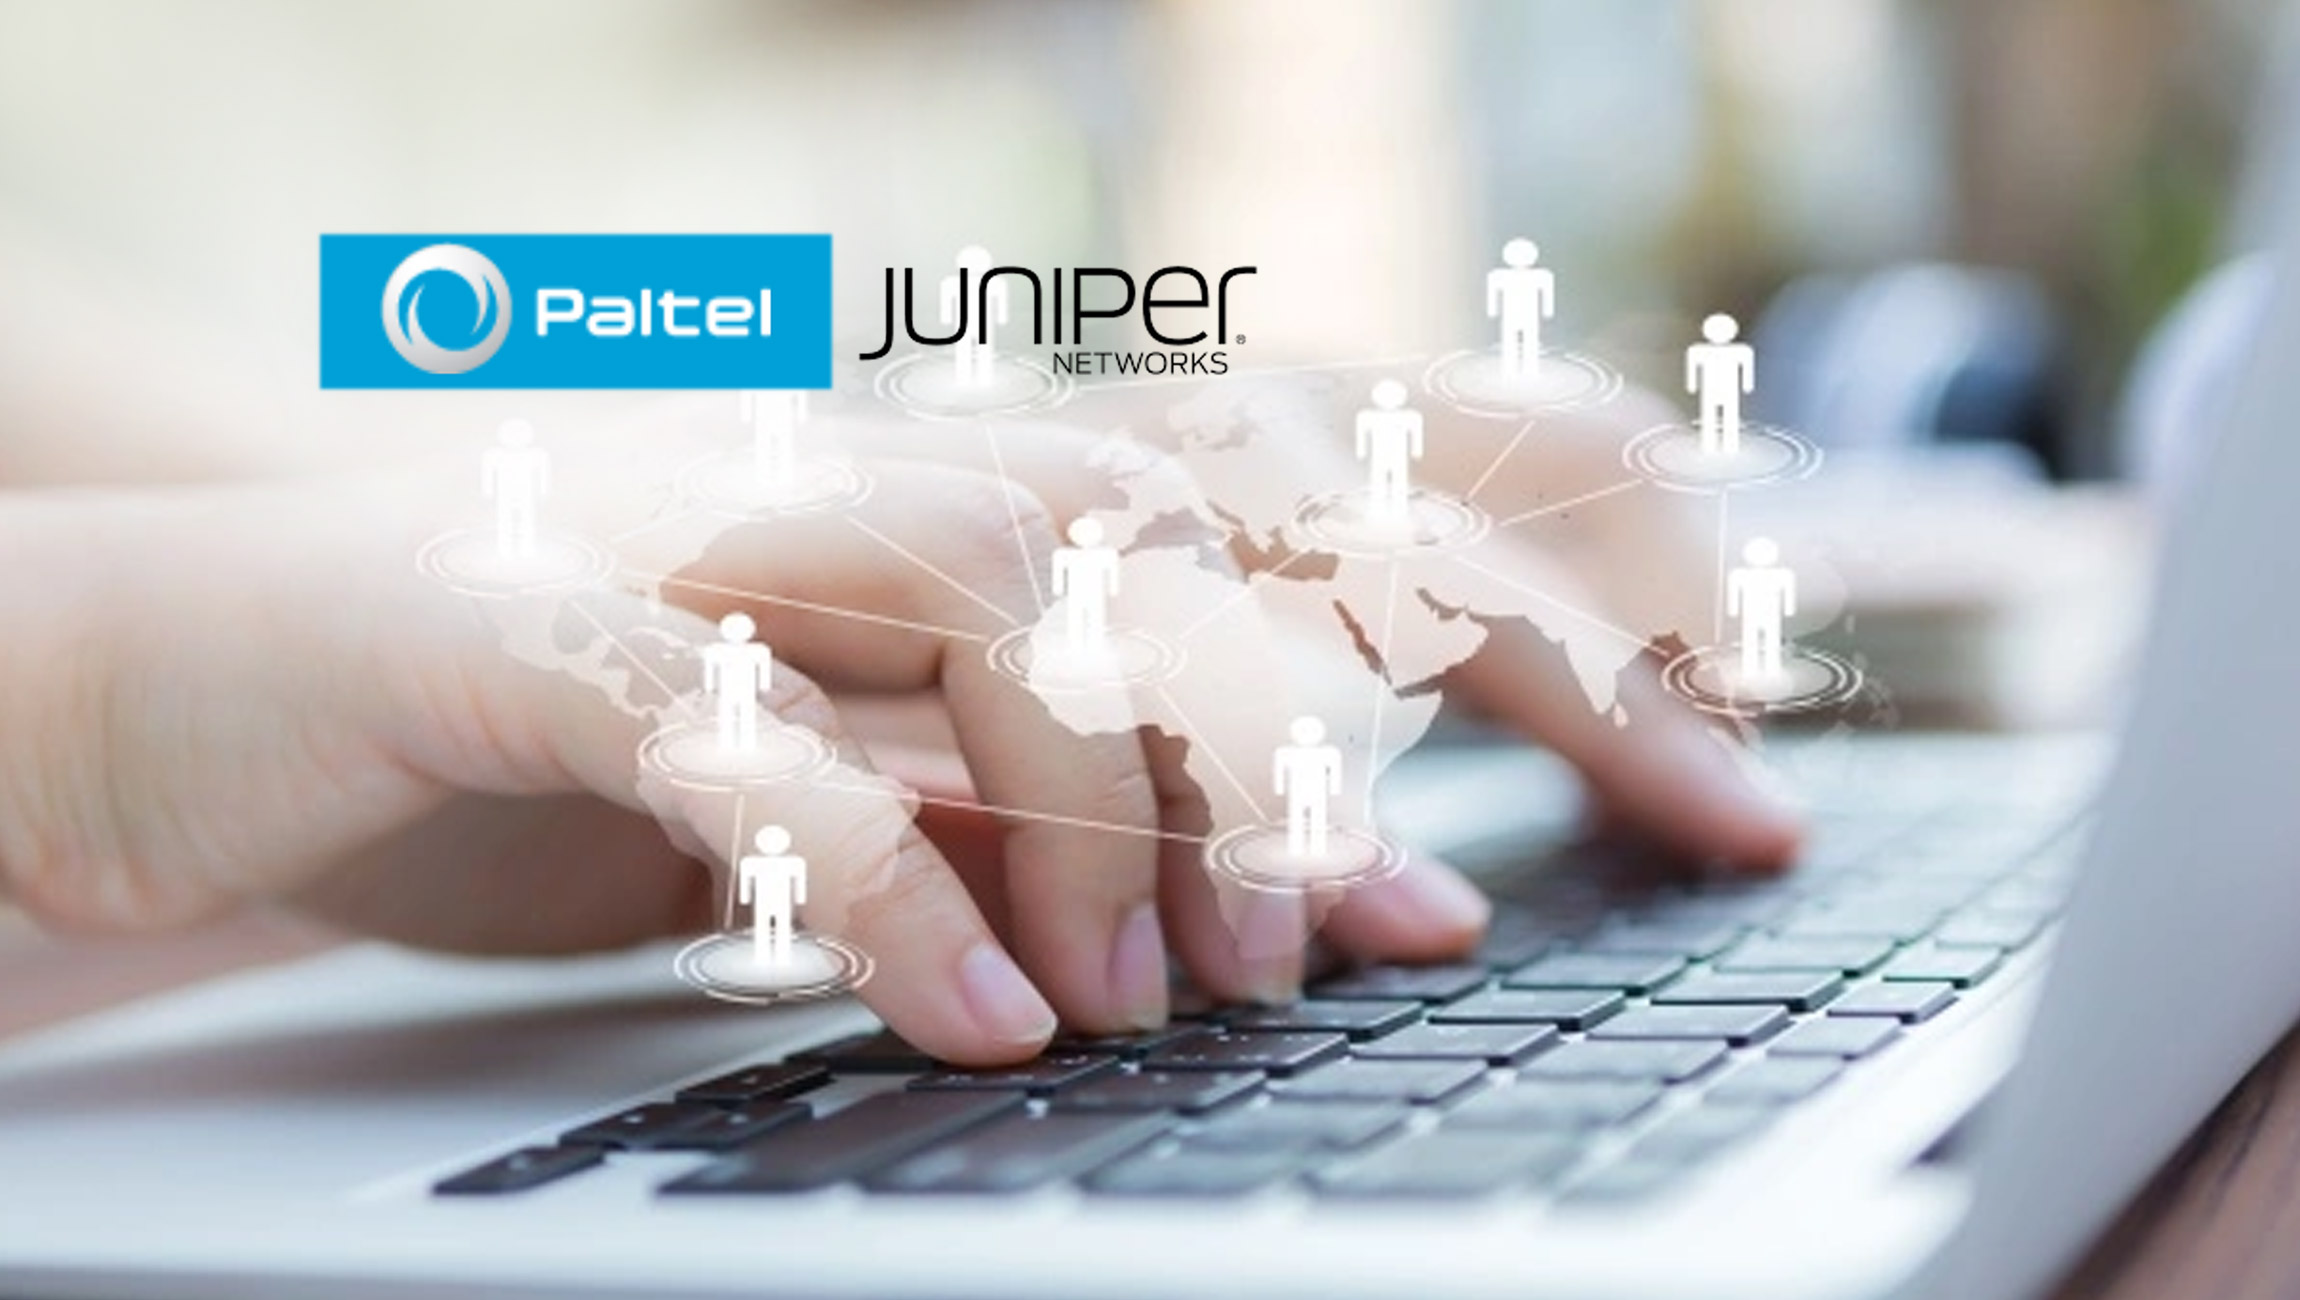 Paltel-Group-Upgrades-Network-Infrastructure-with-Juniper-Networks-for-a-Superior-User-Experience